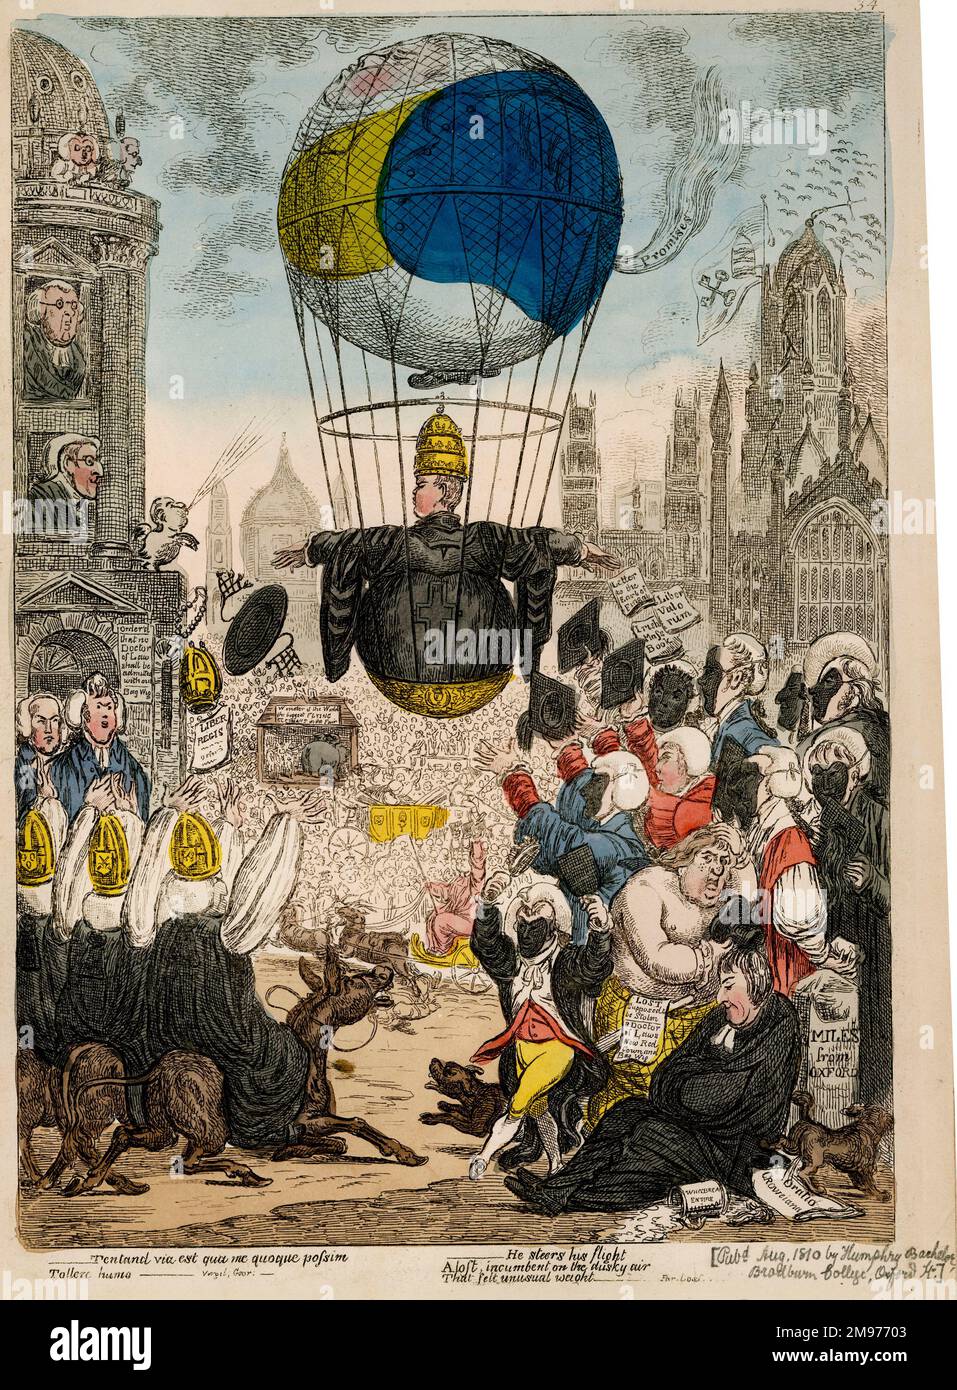 James Gillray. ‘He Steers His Flight: Or, Tentanda via est qua me quoque possim tollere humo’ (1810) [A cartoon of Lord Grenville’s Installation as Chancellor of Oxford. Grenville, seated in a balloon, is ascending into the air. He is attired in his Chancellor’s gown, with a crucifix on his back]. [Cuthbert-Hodgson Collection] Stock Photo